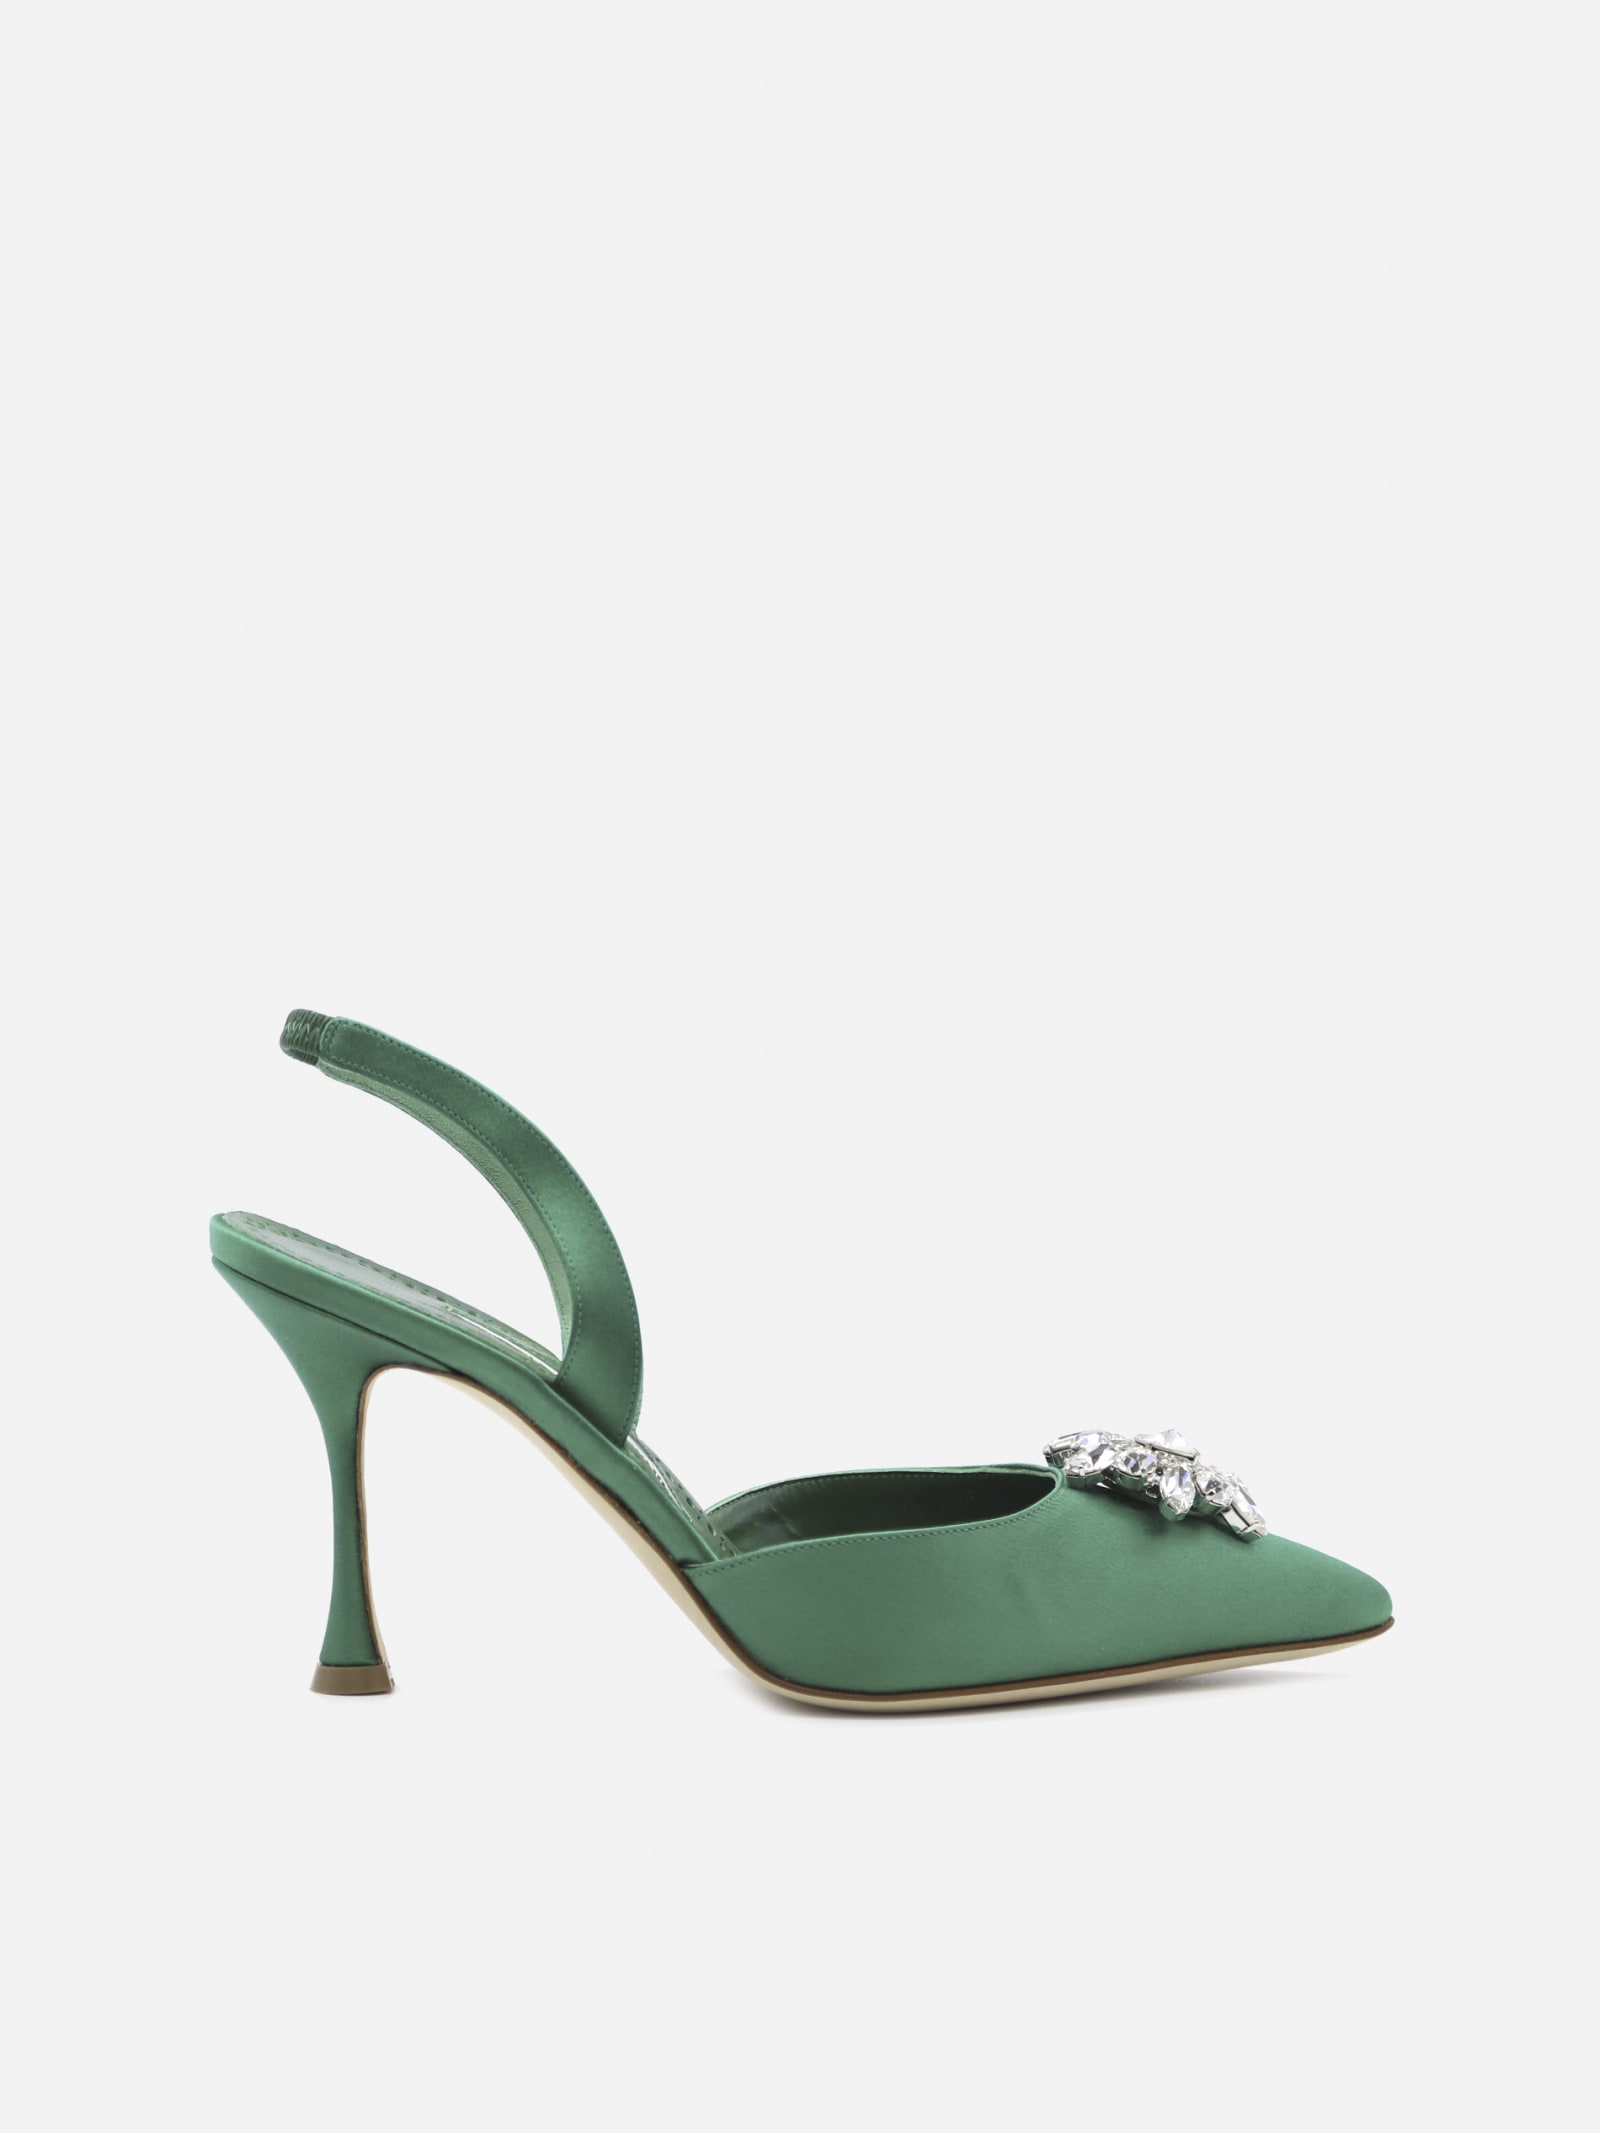 Manolo Blahnik Cassina Slingback Décolleté In Silk Satin Embellished With Crystals